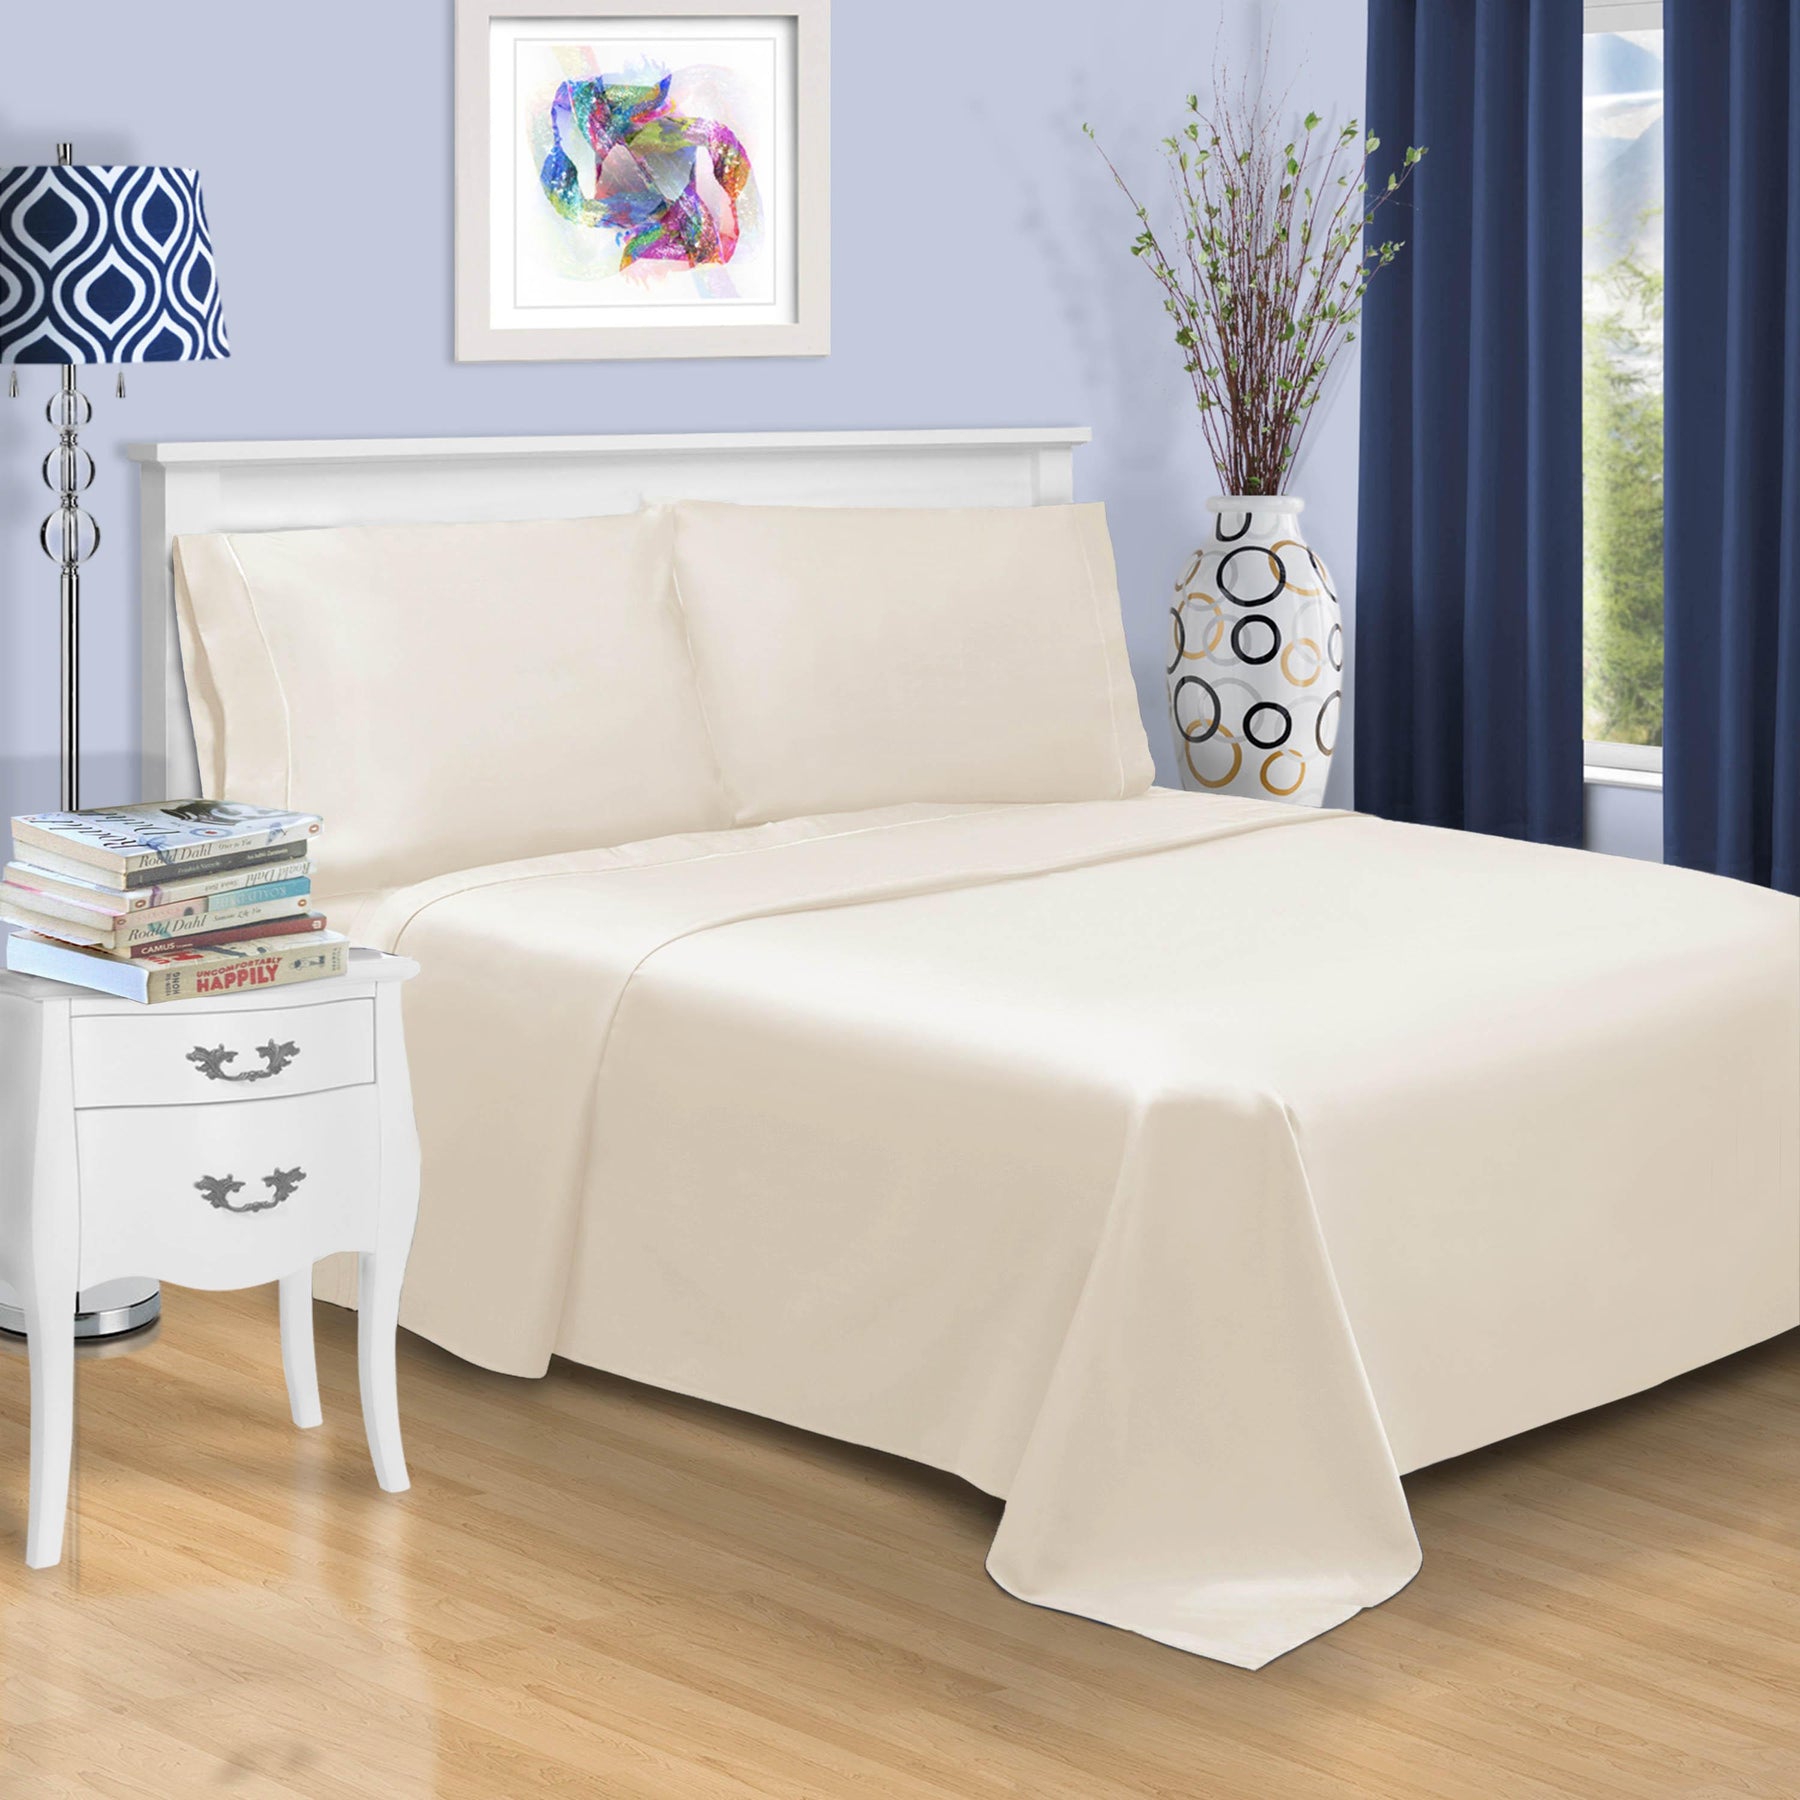  Superior Solid 1500-Thread Count Ultra-Soft Cotton Marrow Stitch Sheet Set - Ivory